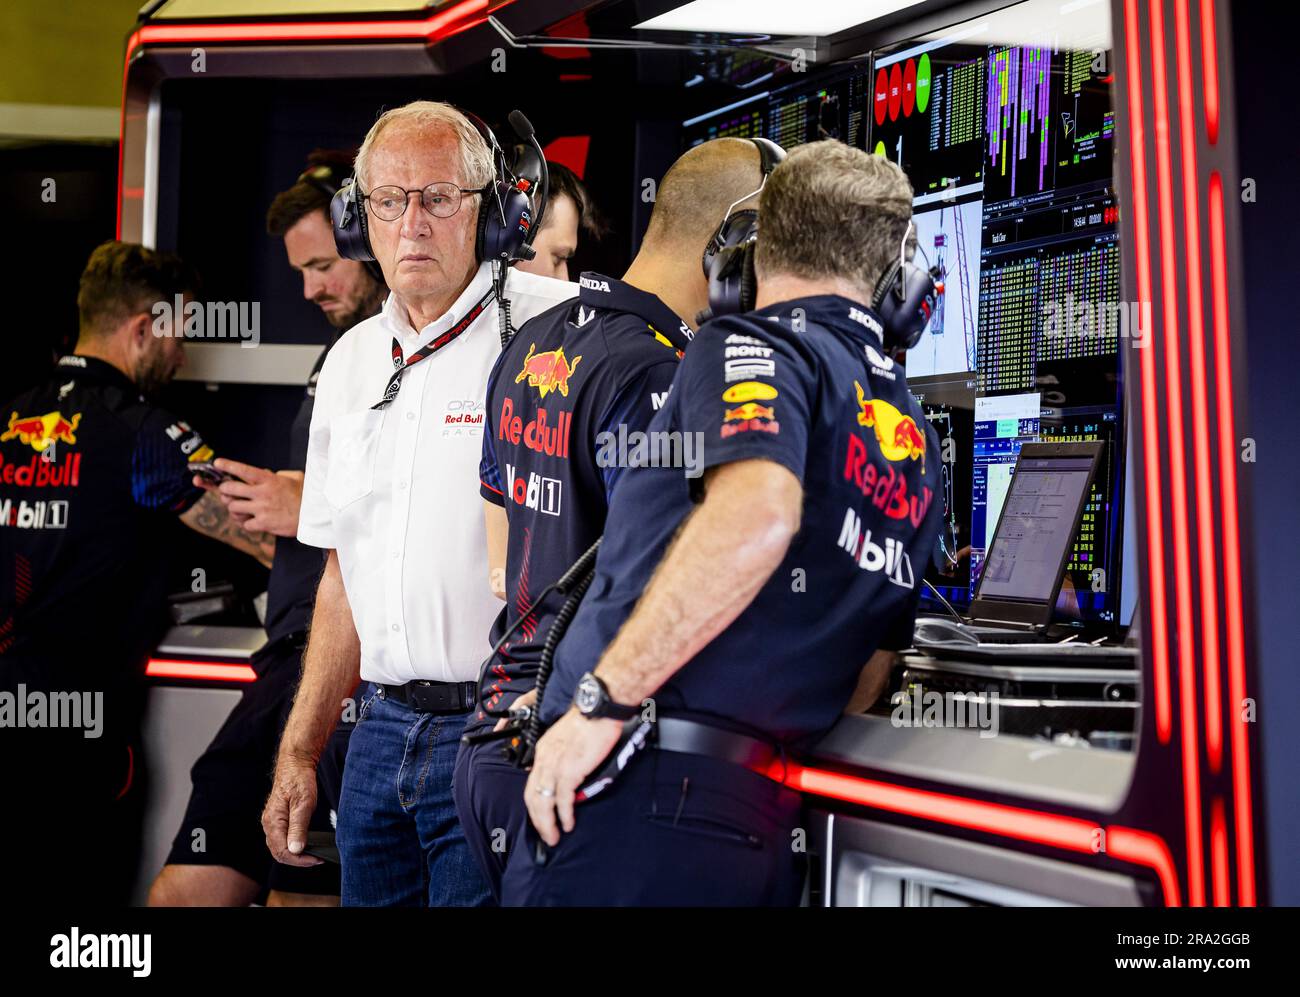 SPIELBERG - Helmut Marko (Red Bull Racing) during the first free practice session ahead of the Austrian Grand Prix at the Red Bull Ring on June 30, 2023 in Spielberg, Austria. ANP SEM VAN DER WAL netherlands out - belgium out Stock Photo